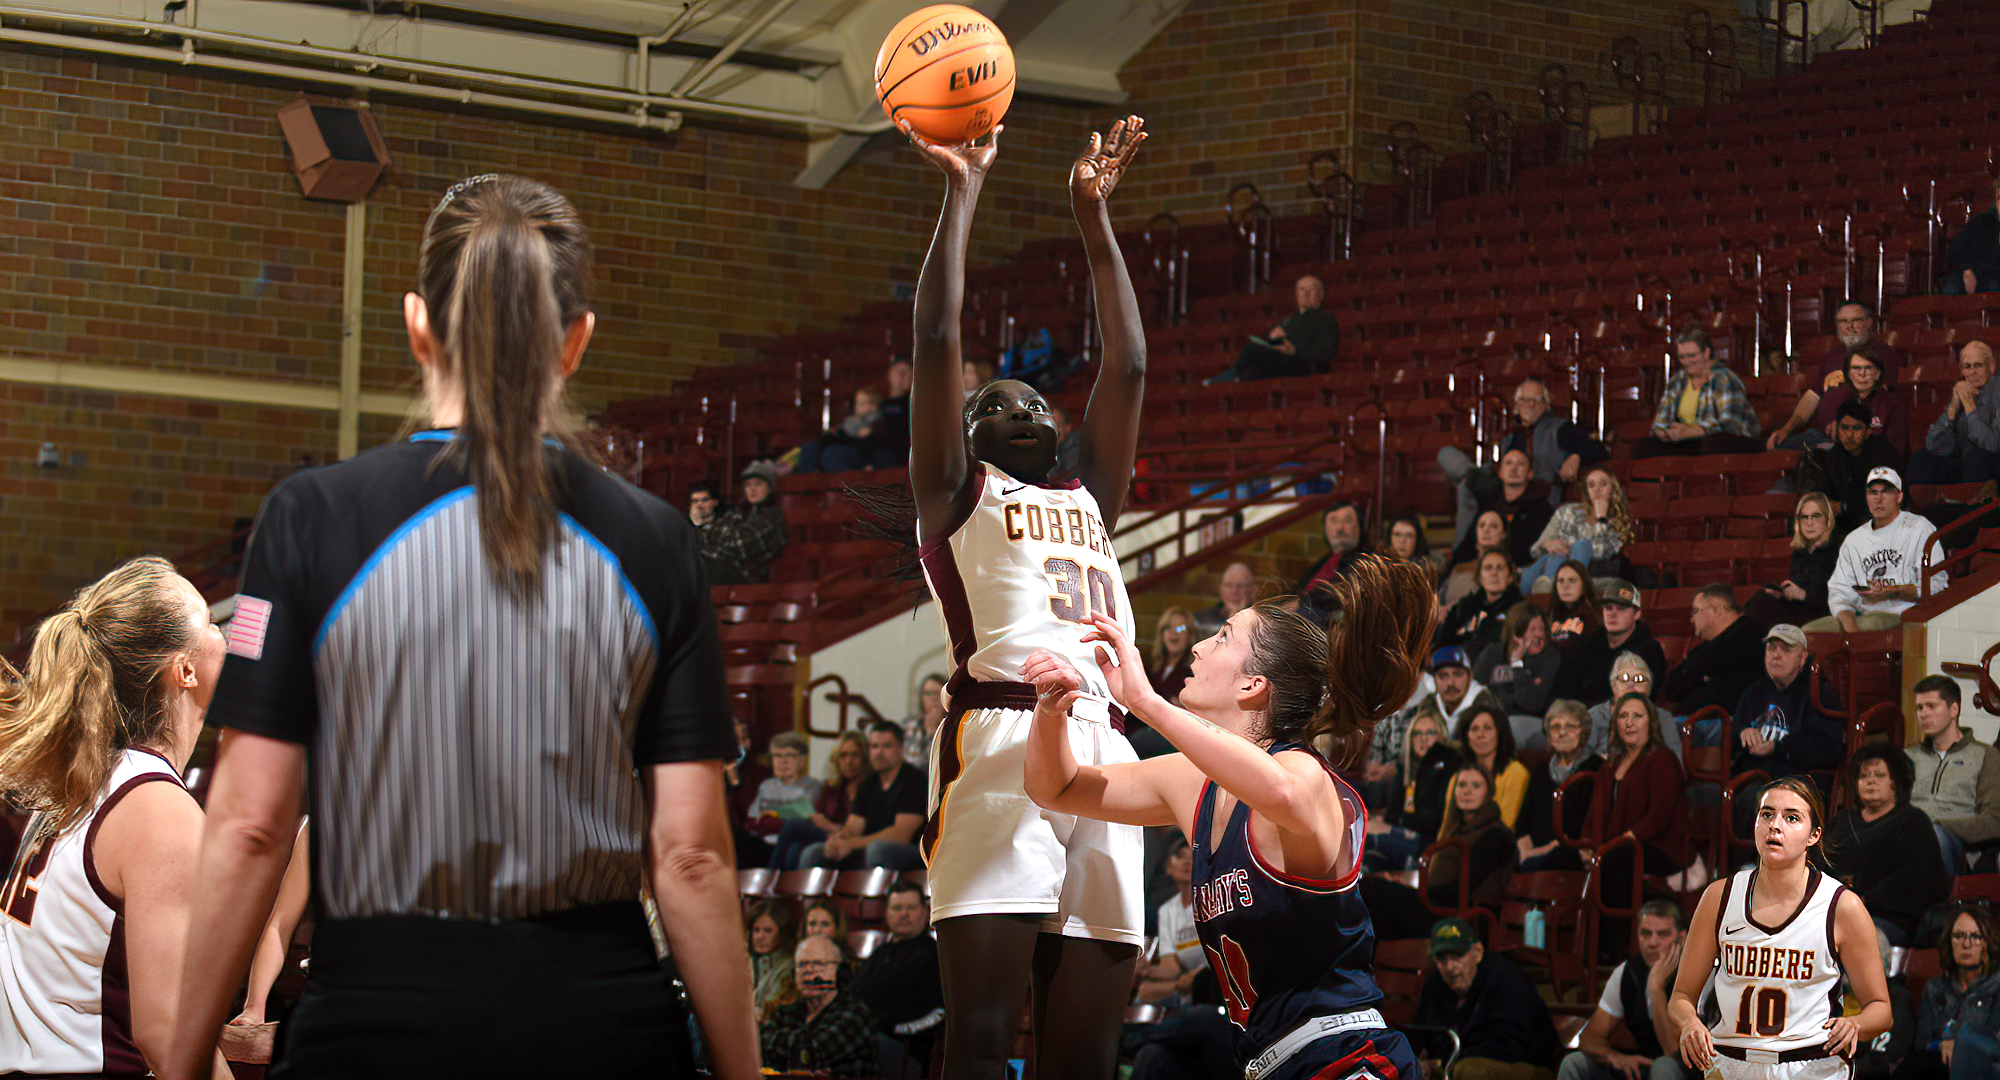 Mary Sem scored a season0high 11 points in the Cobbers' win at St. Mary's. She was one of four players with at least 10 points.